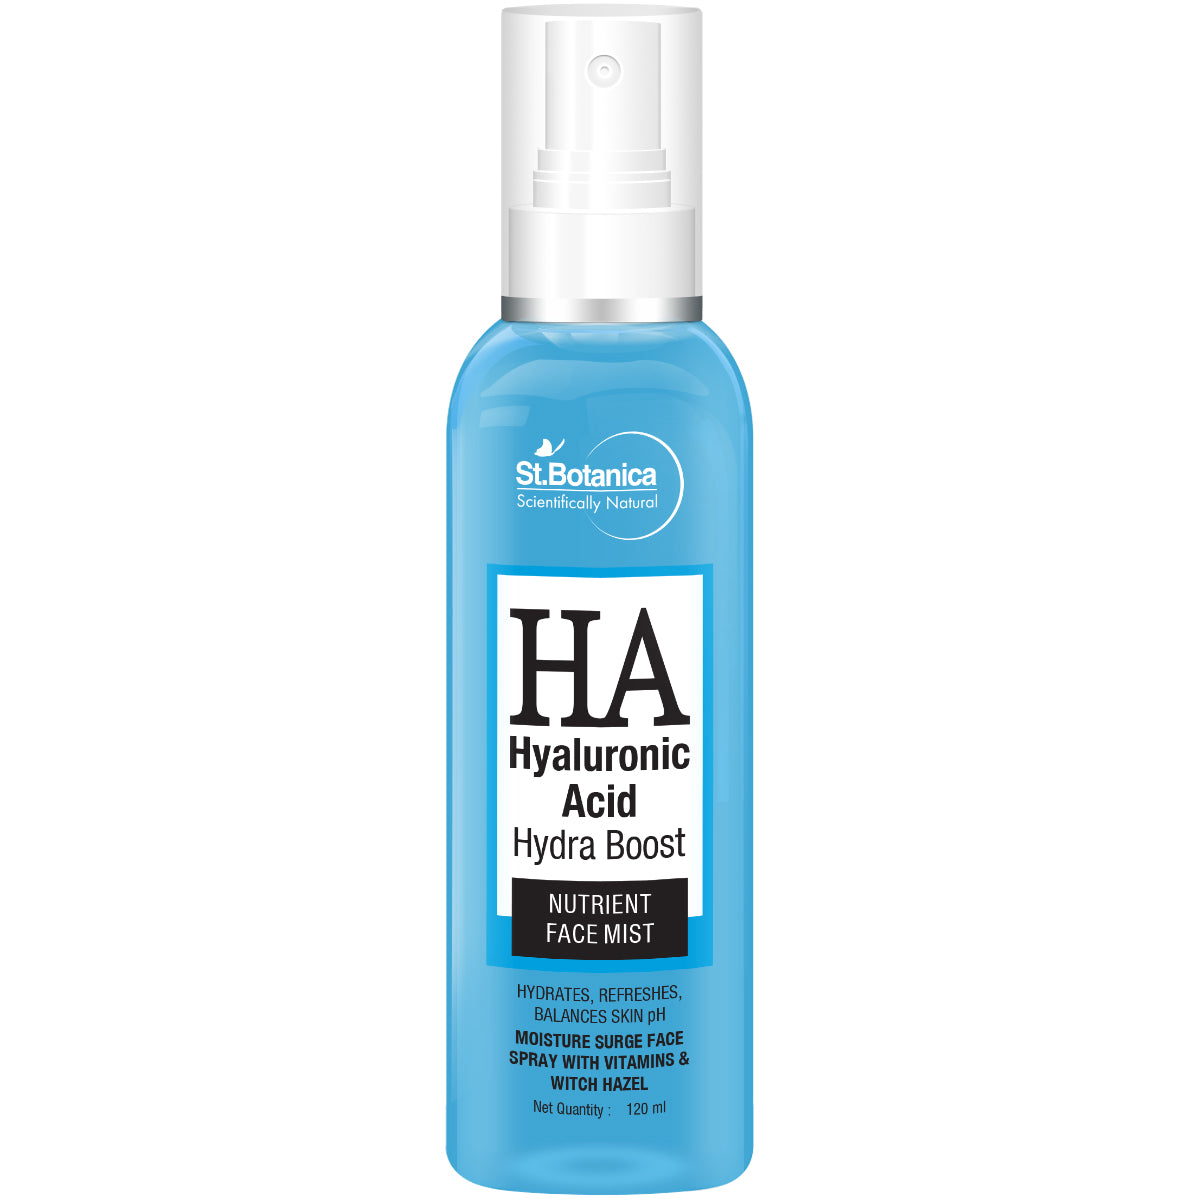 St.Botanica Hyaluronic Acid Hydra Boost Nutrient Face Mist, Moisture Surge Face Spray with Vitamins & Witch Hazel, 120 ml (STBOT562)